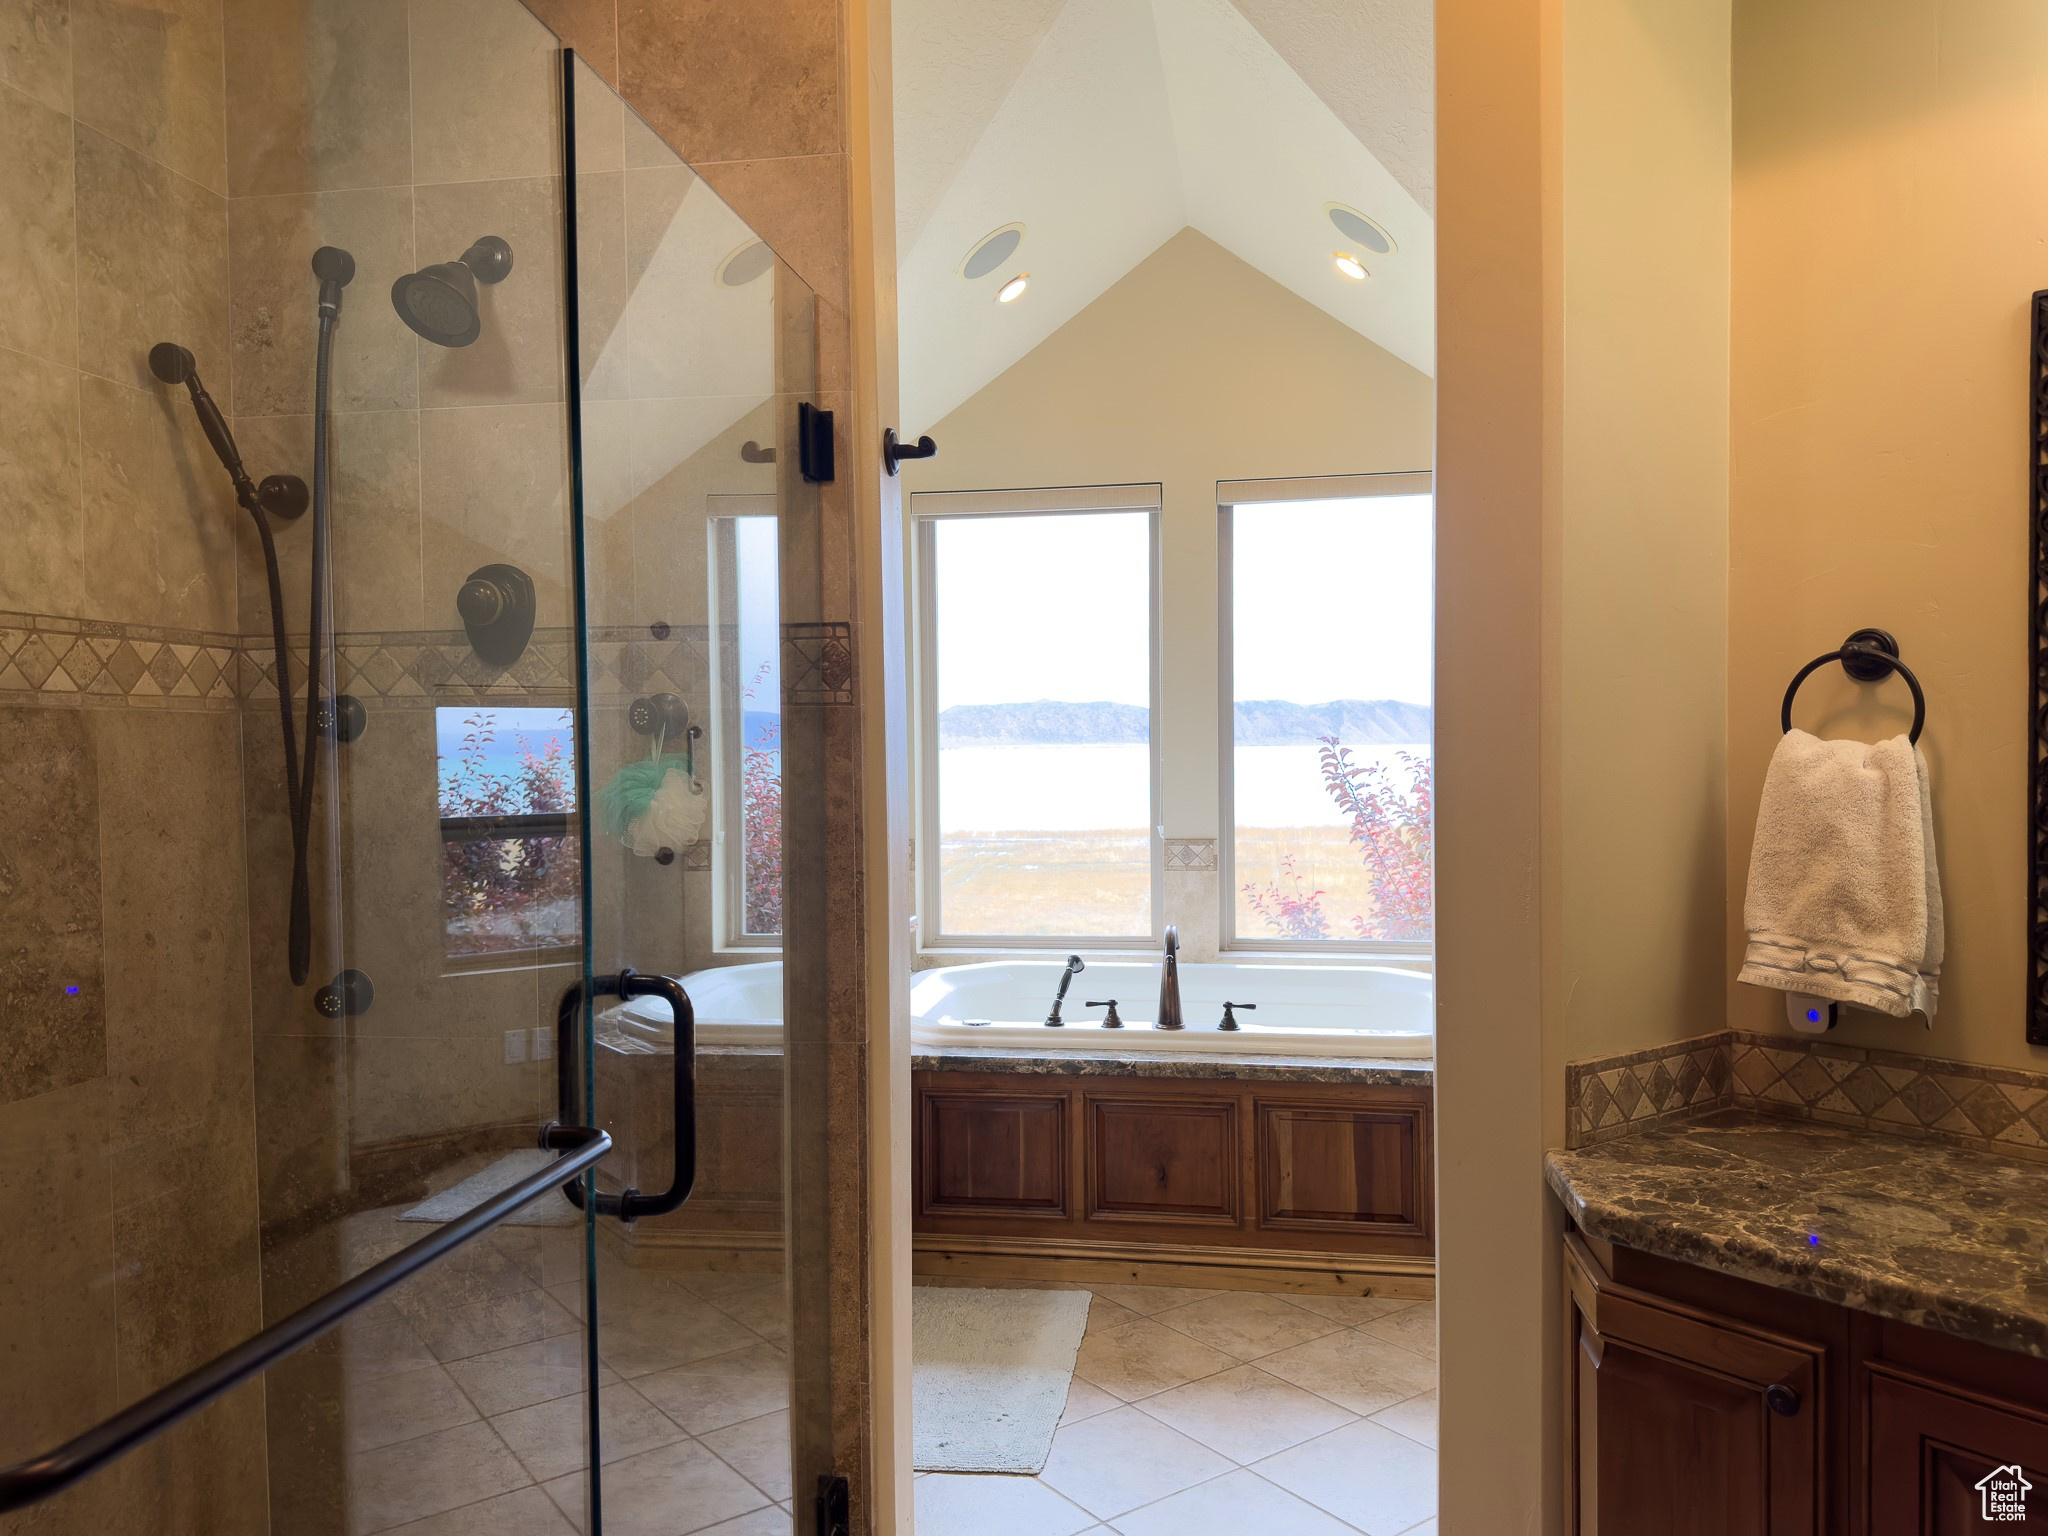 Bathroom featuring tile floors, vaulted ceiling, and plus walk in shower